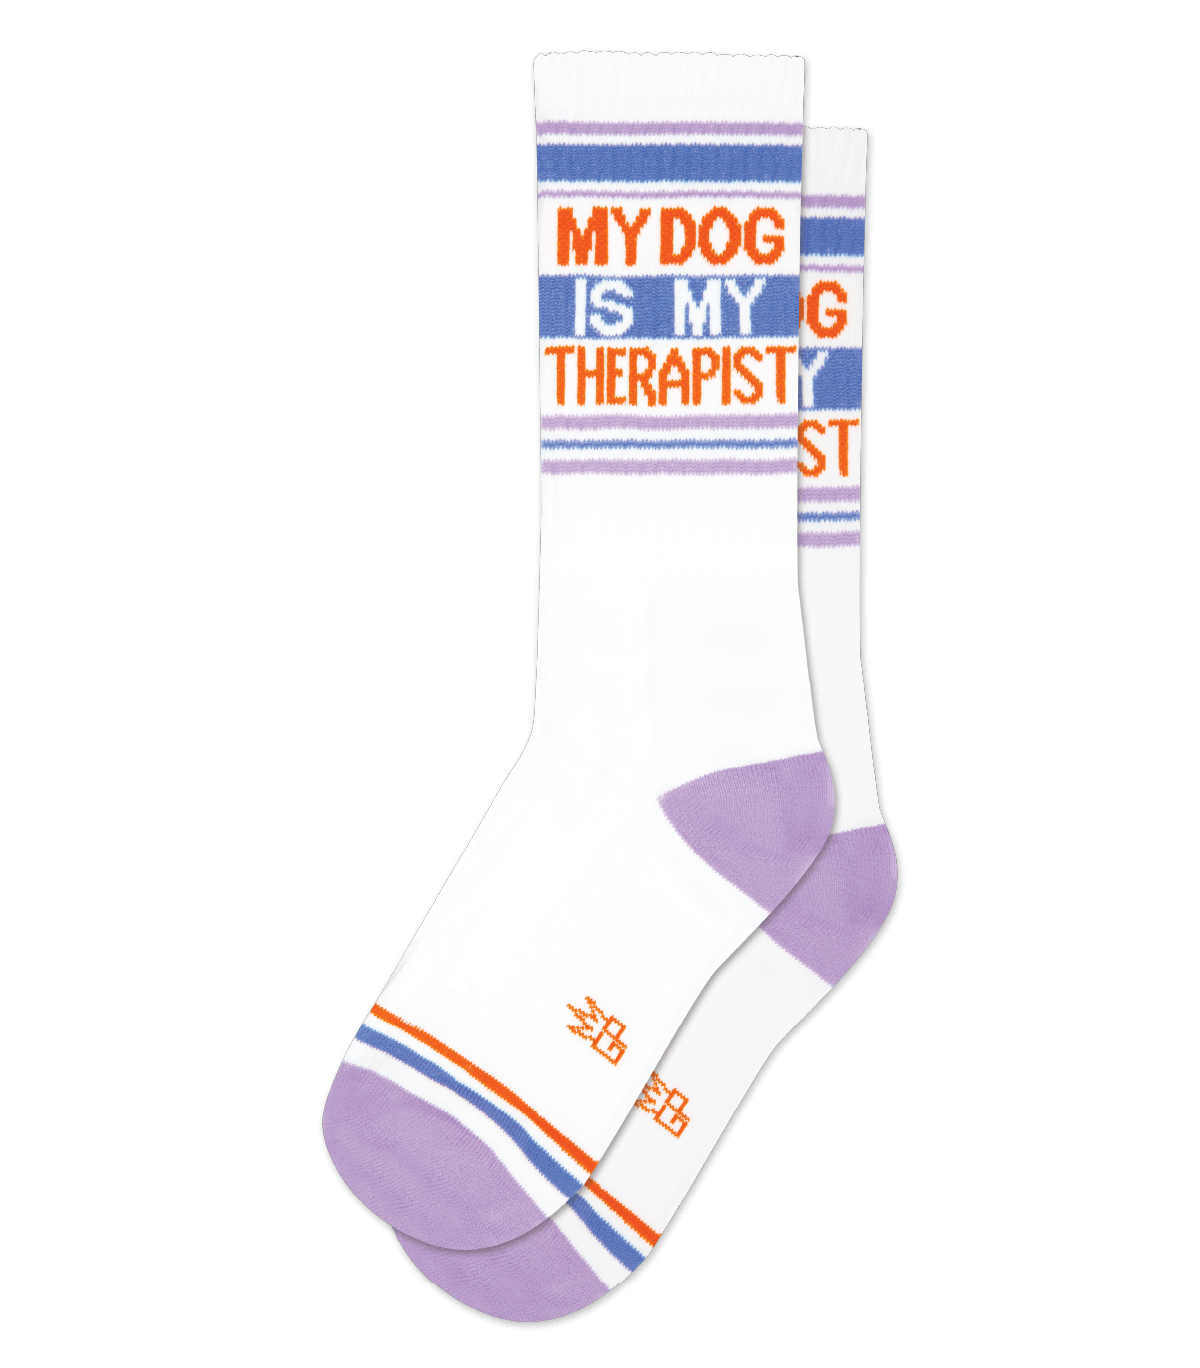 MY DOG IS MY THERAPIST - Funny gym Socks – Gumball Poodle